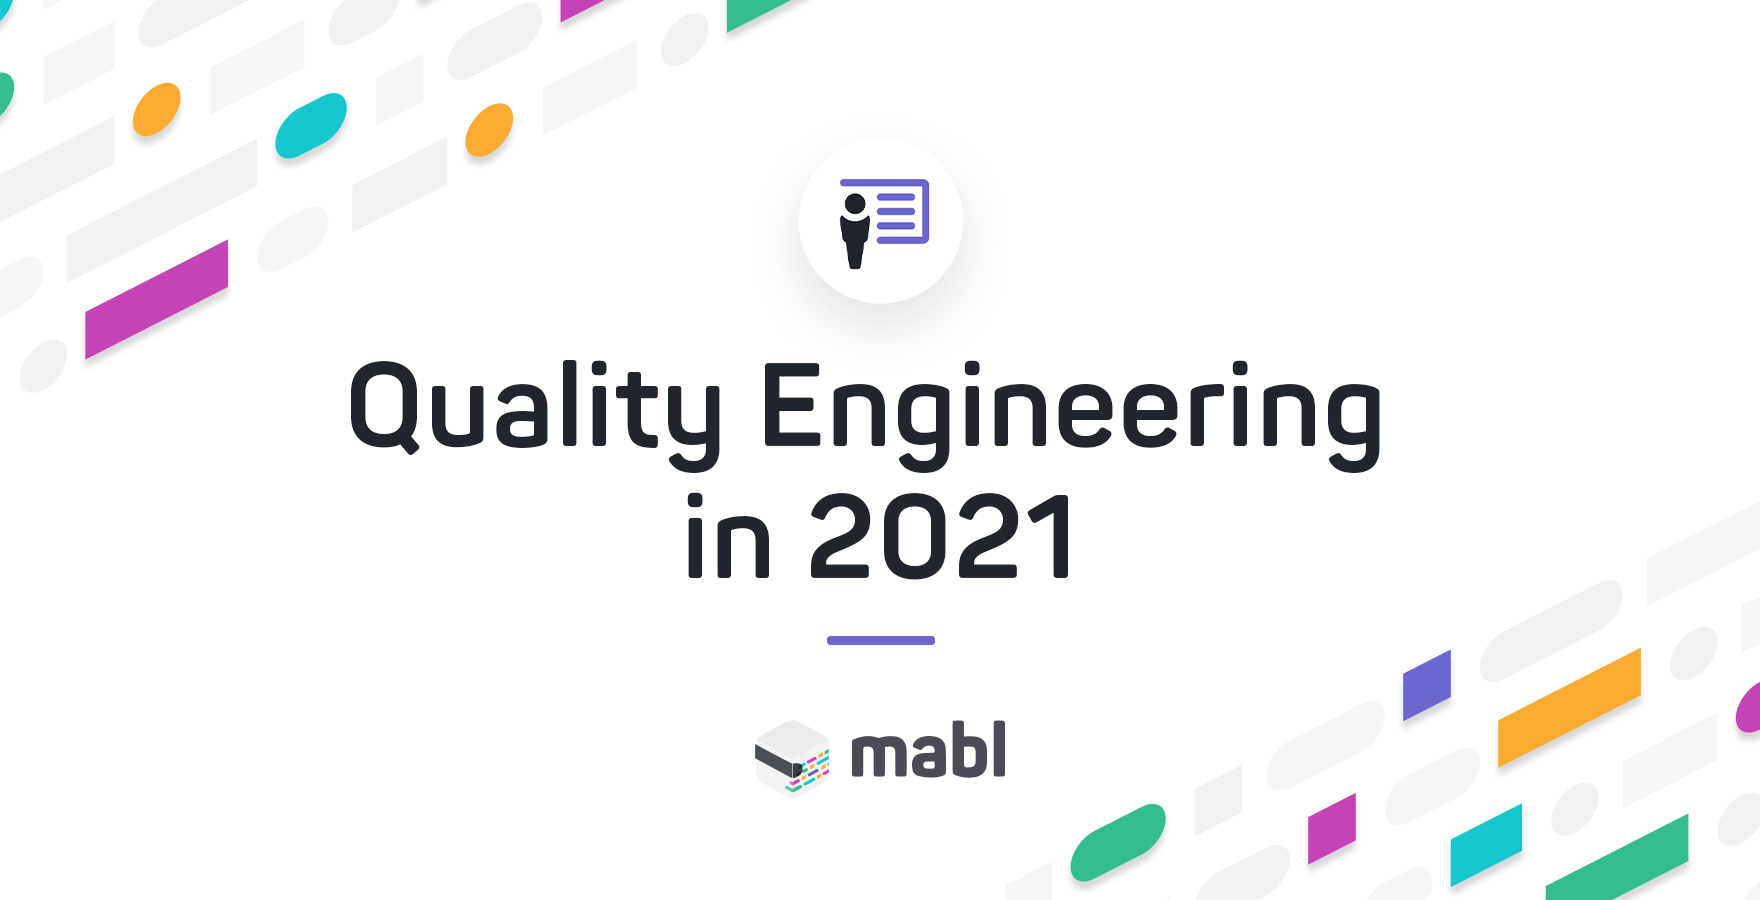 Quality Engineering in 2021